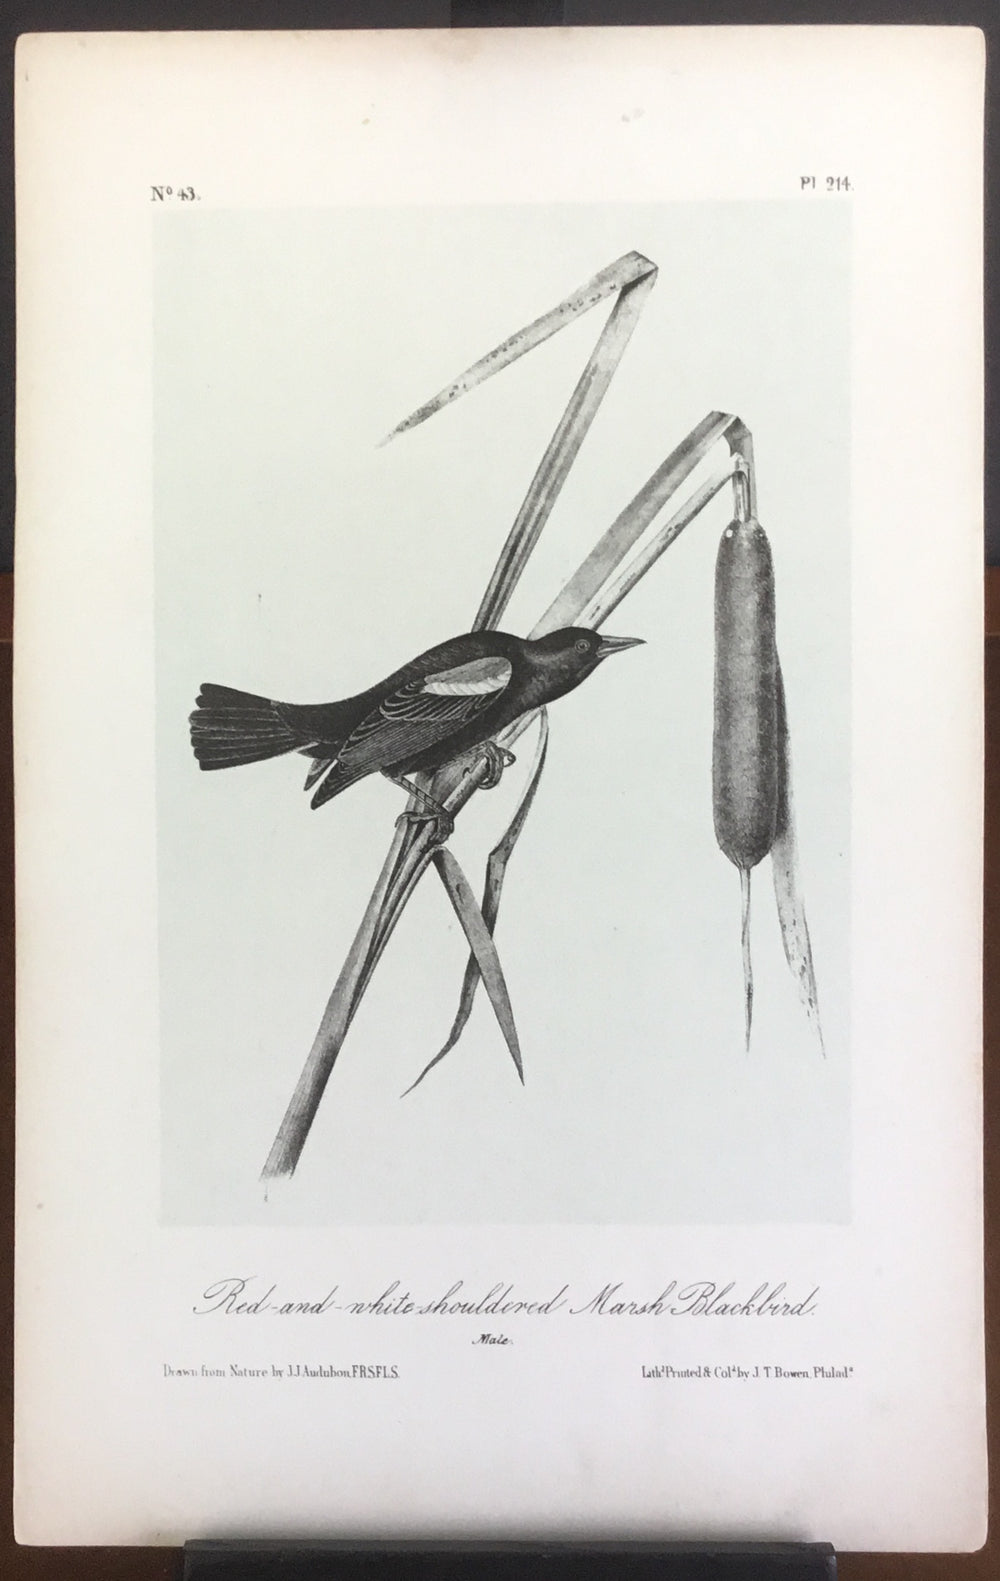 Audubon Octavo Red and White-shouldered Marsh Blackbird , plate 214, uncolored test sheet, 7 x 11